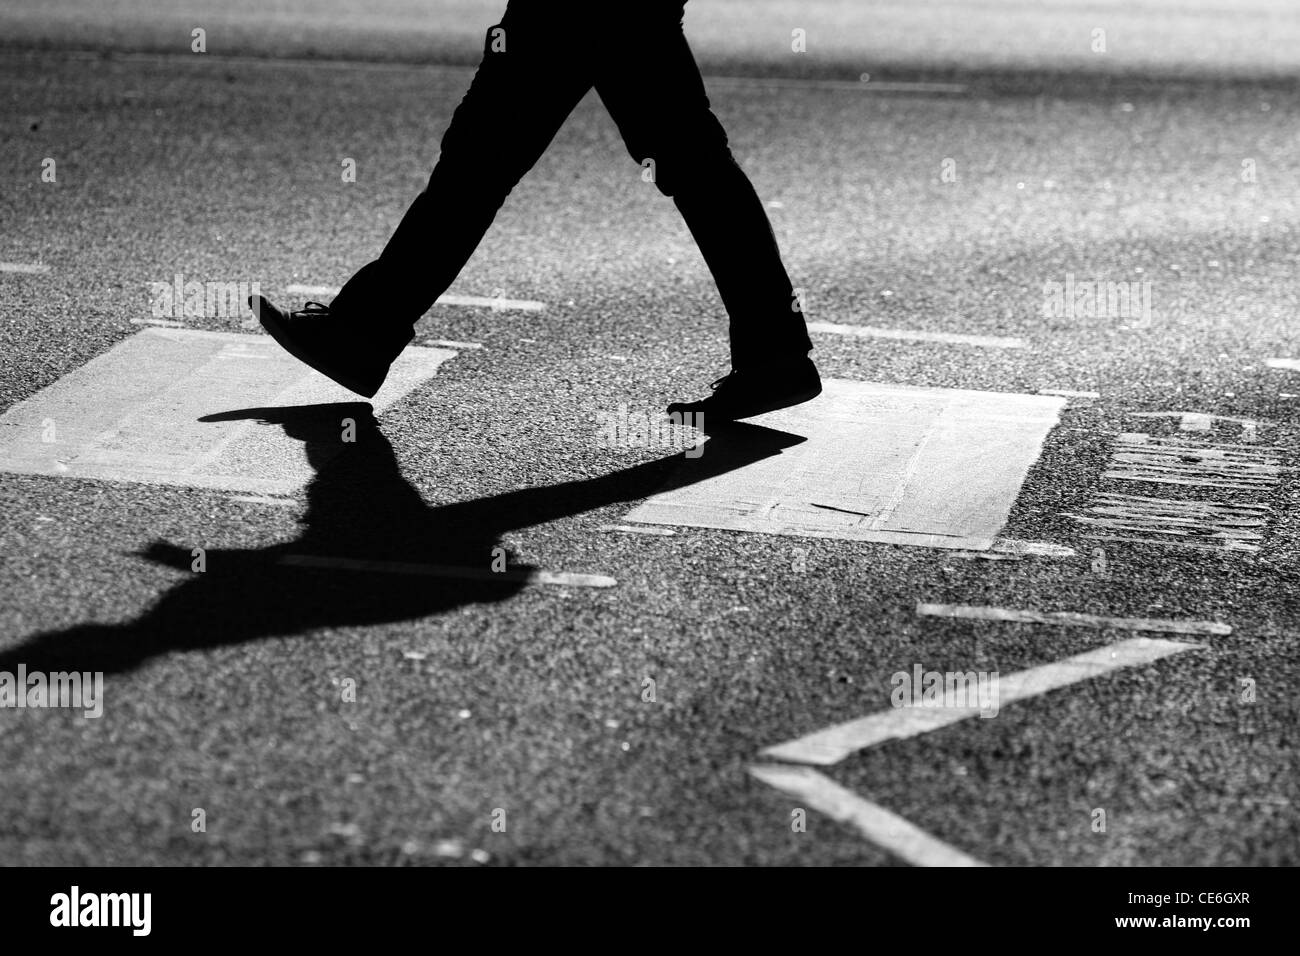 The legs of a man as he crosses a road at a zebra crossing Stock Photo